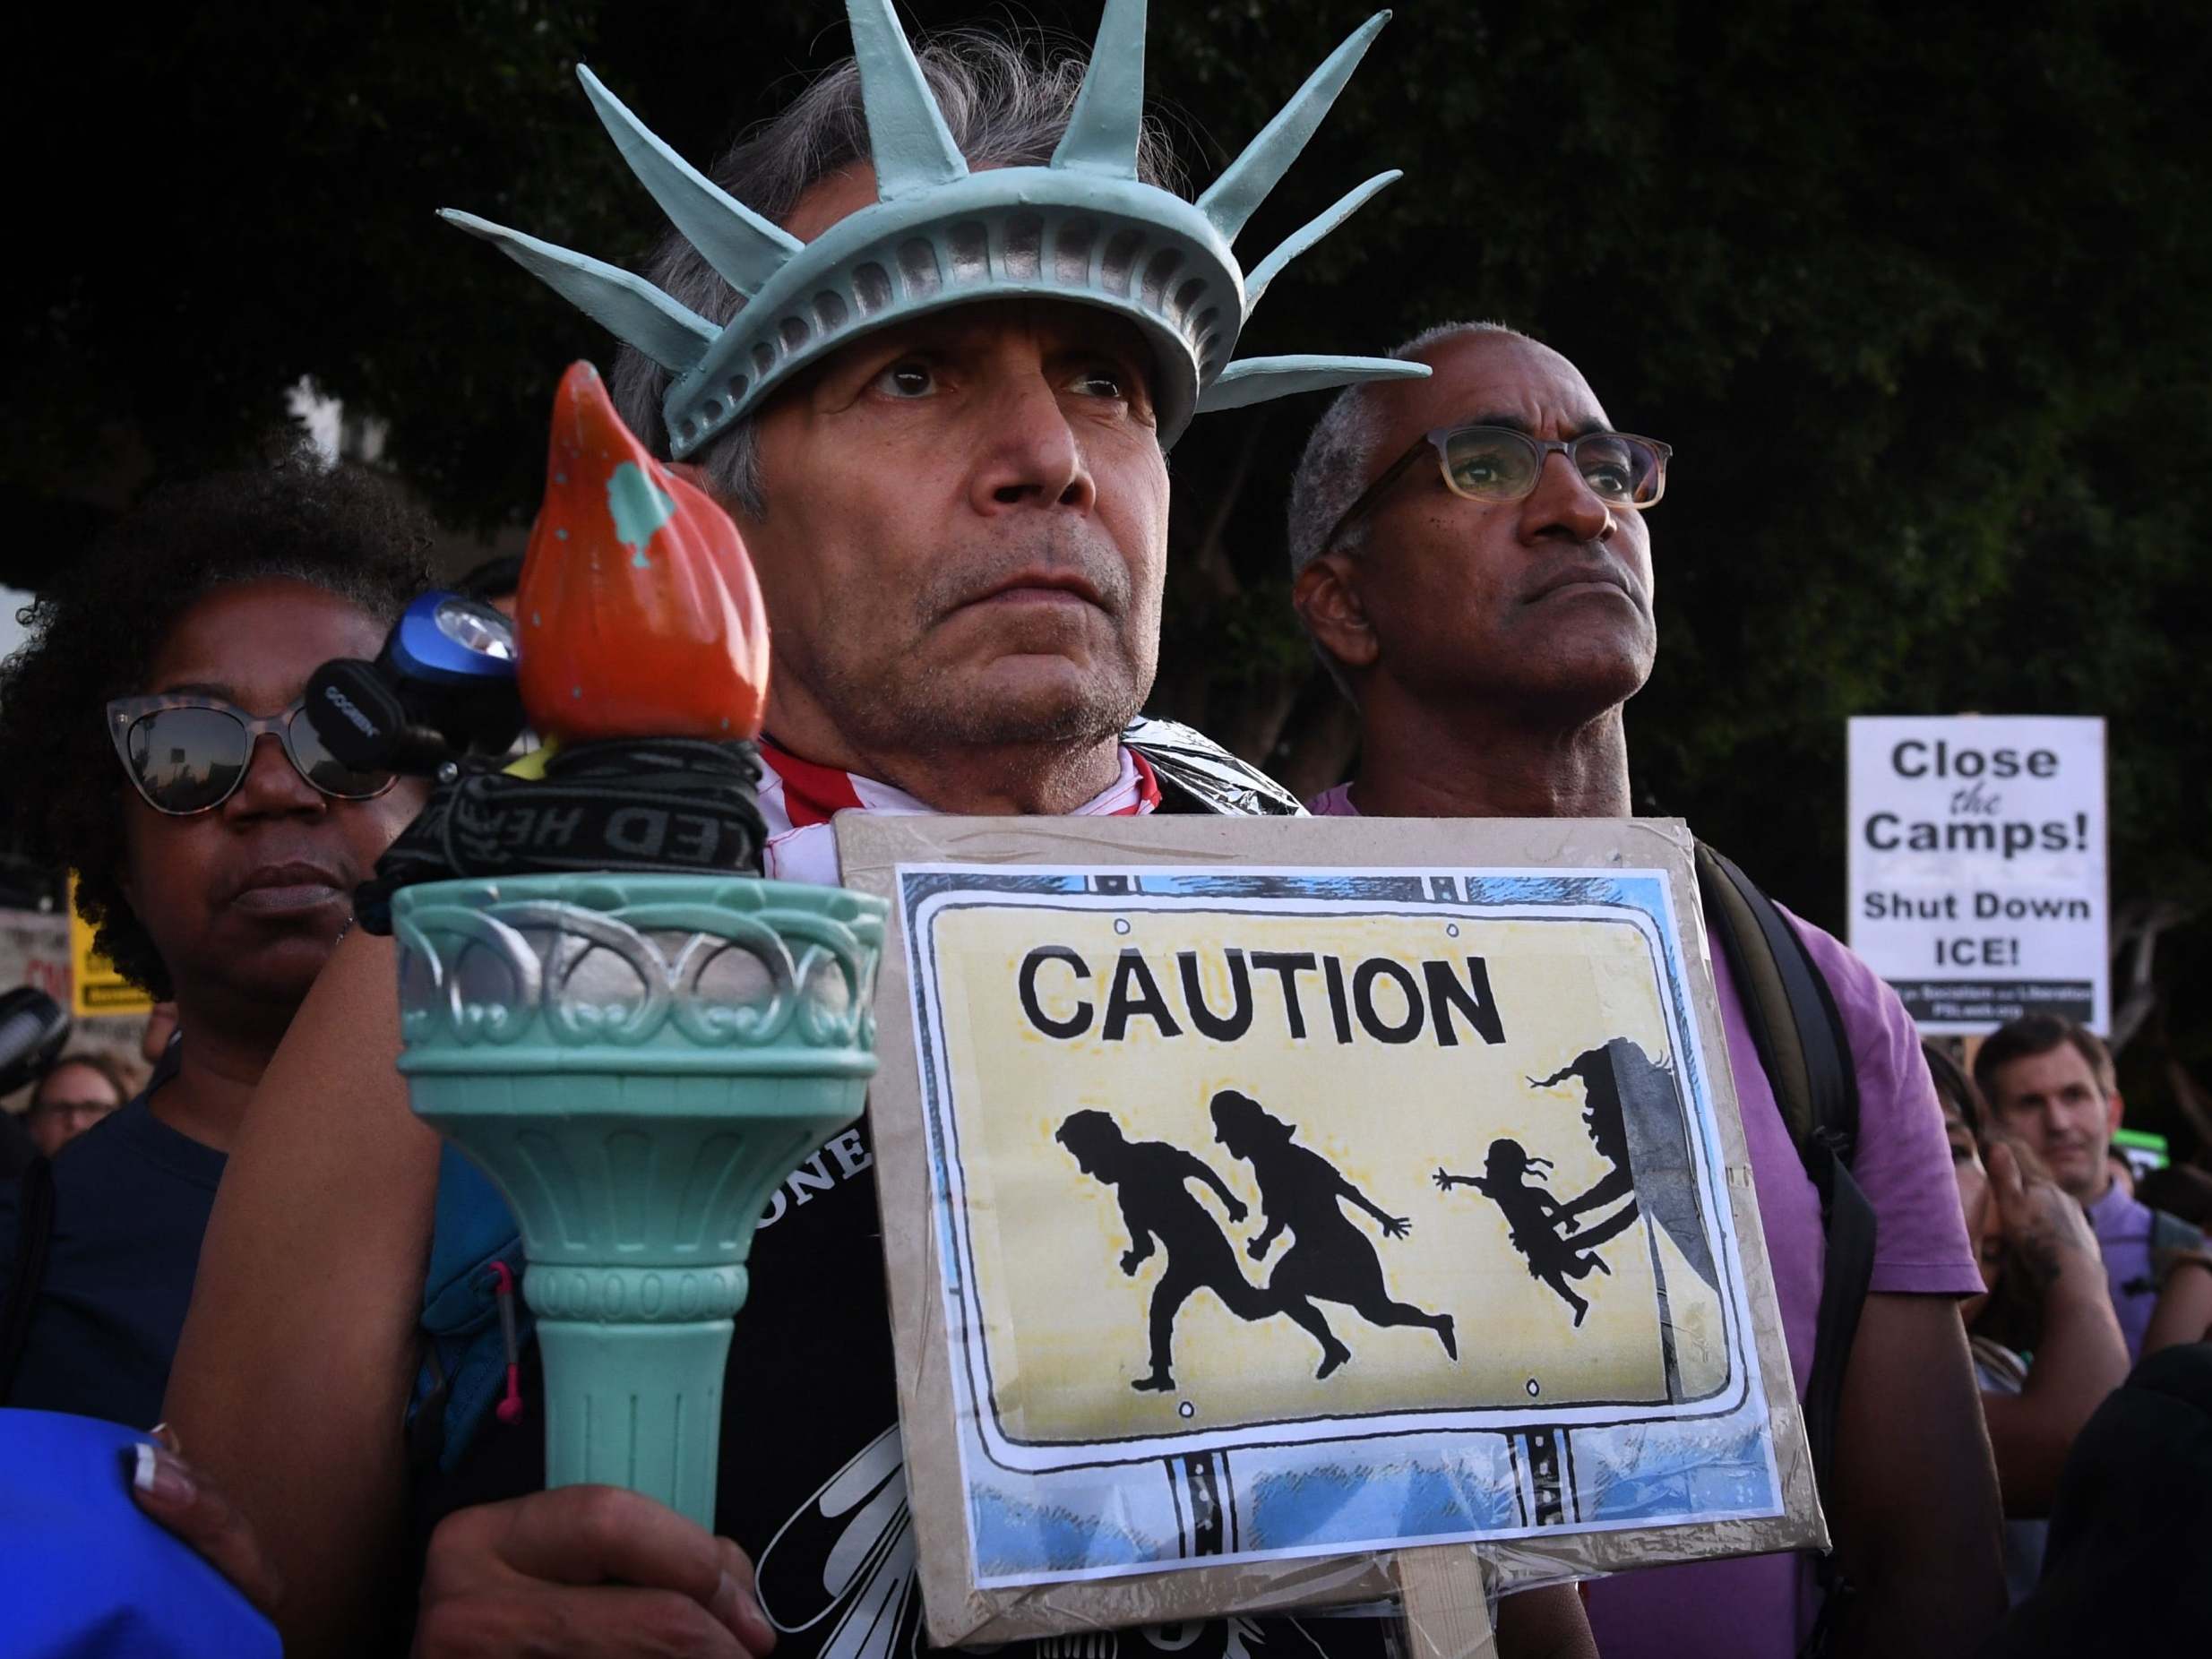 A man wears a Statue of Liberty crown during protests against the raids and detentions of asylum-seekers at a vigil in Los Angeles